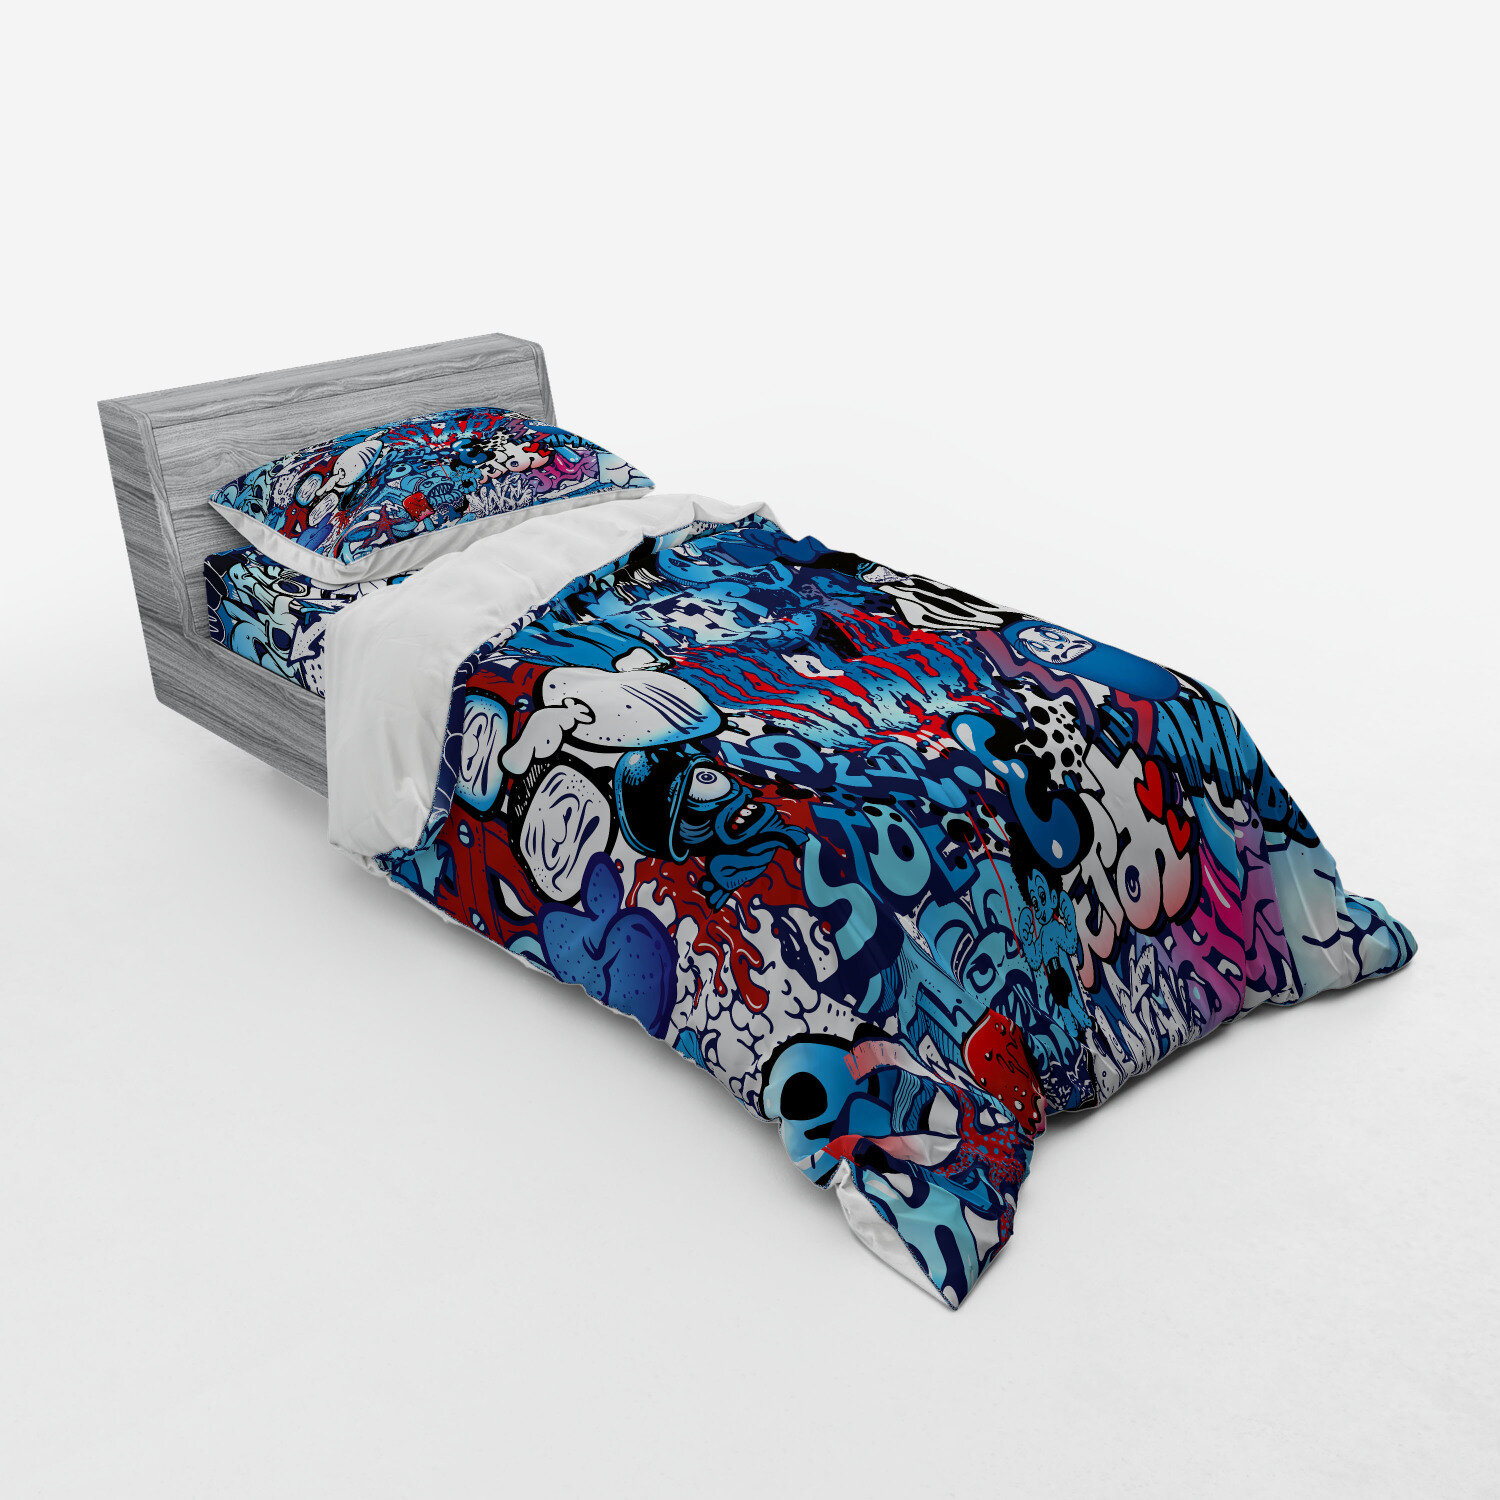 East Urban Home Ambesonne Modern Bedding Set Teenager Style Image